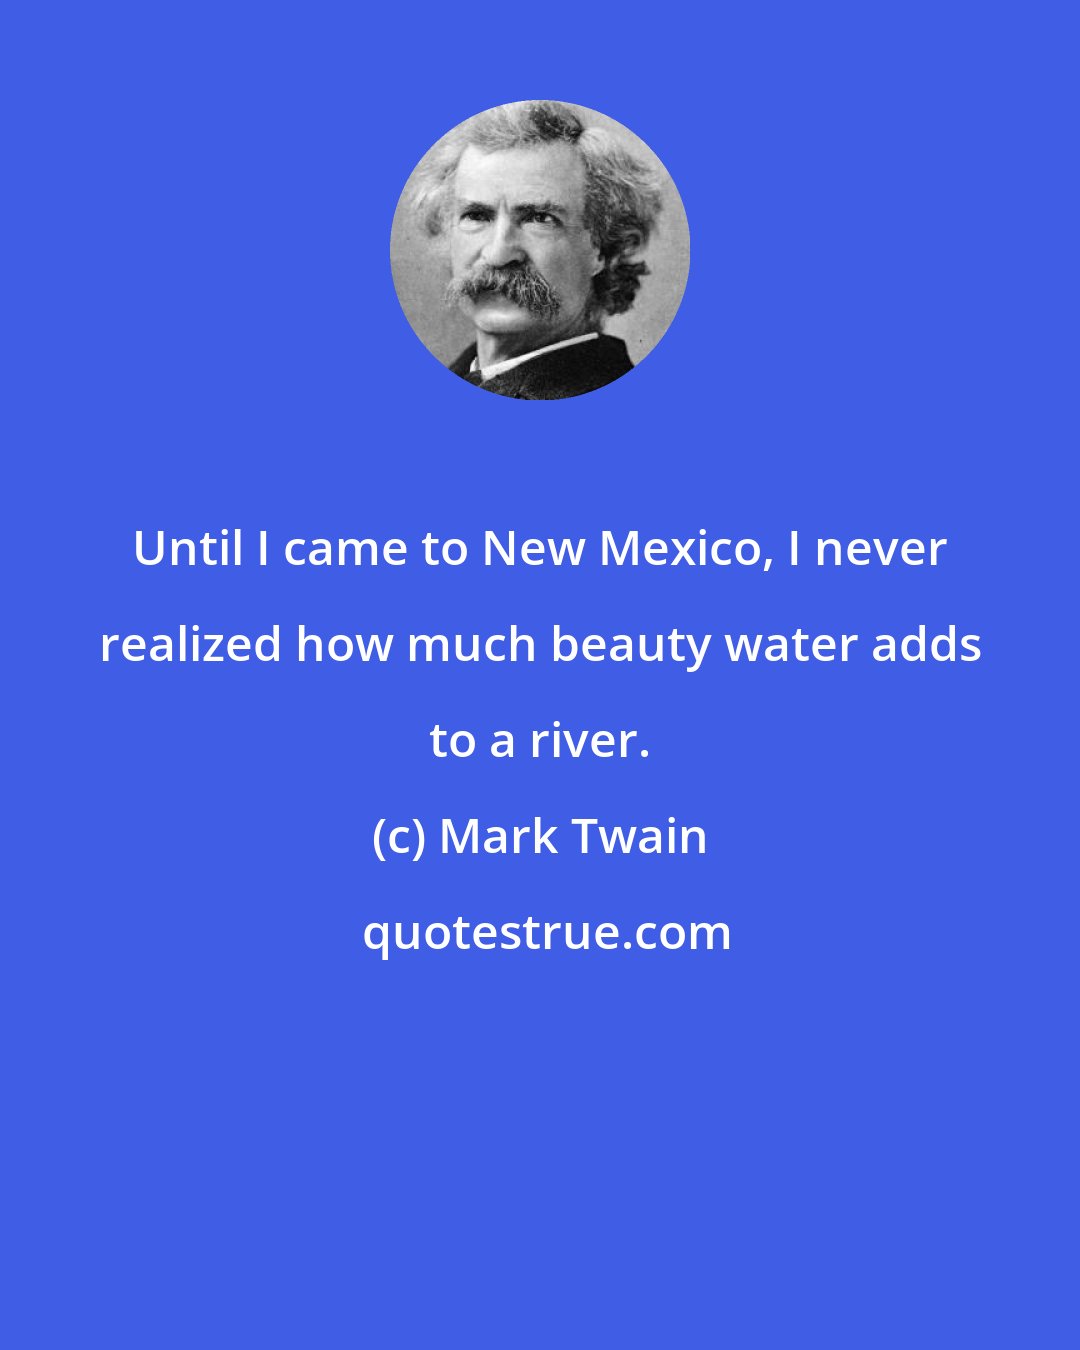 Mark Twain: Until I came to New Mexico, I never realized how much beauty water adds to a river.